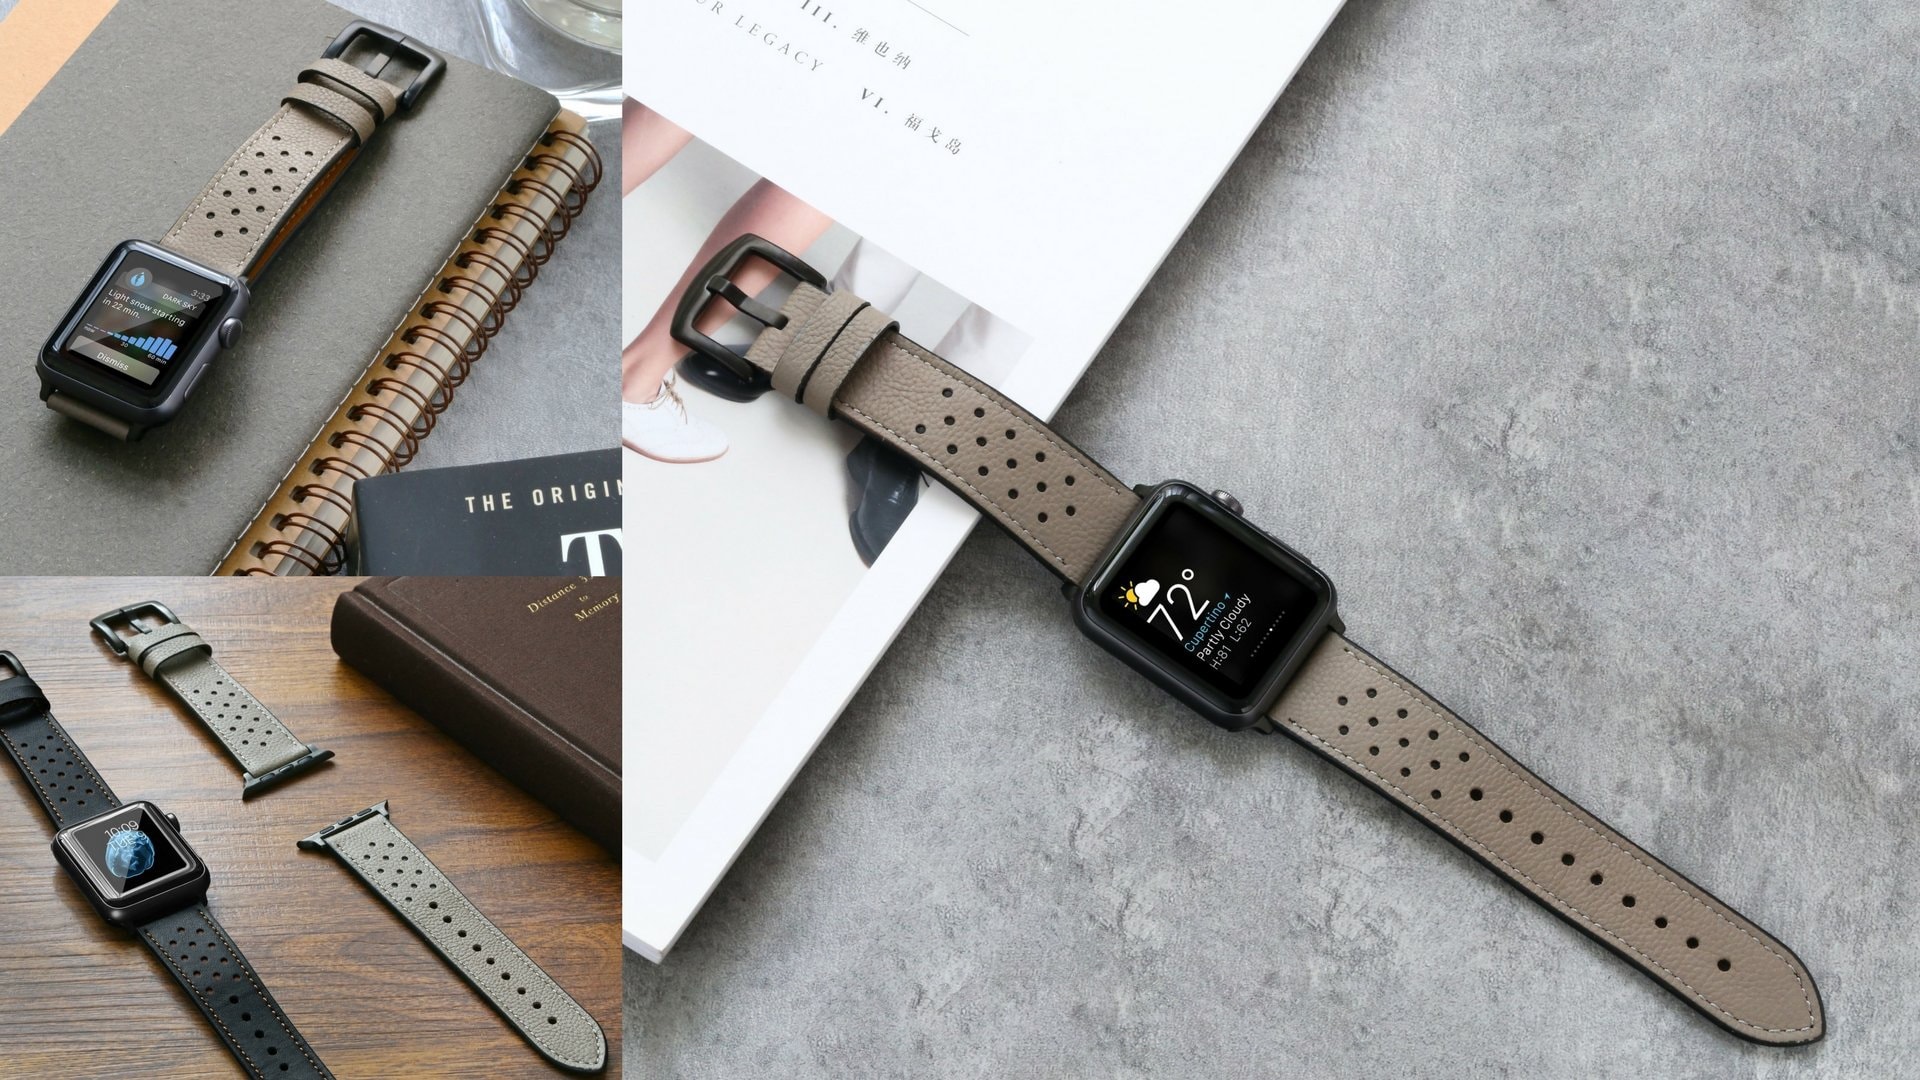 Get the lowdown on some great Apple Watch bands and other gear